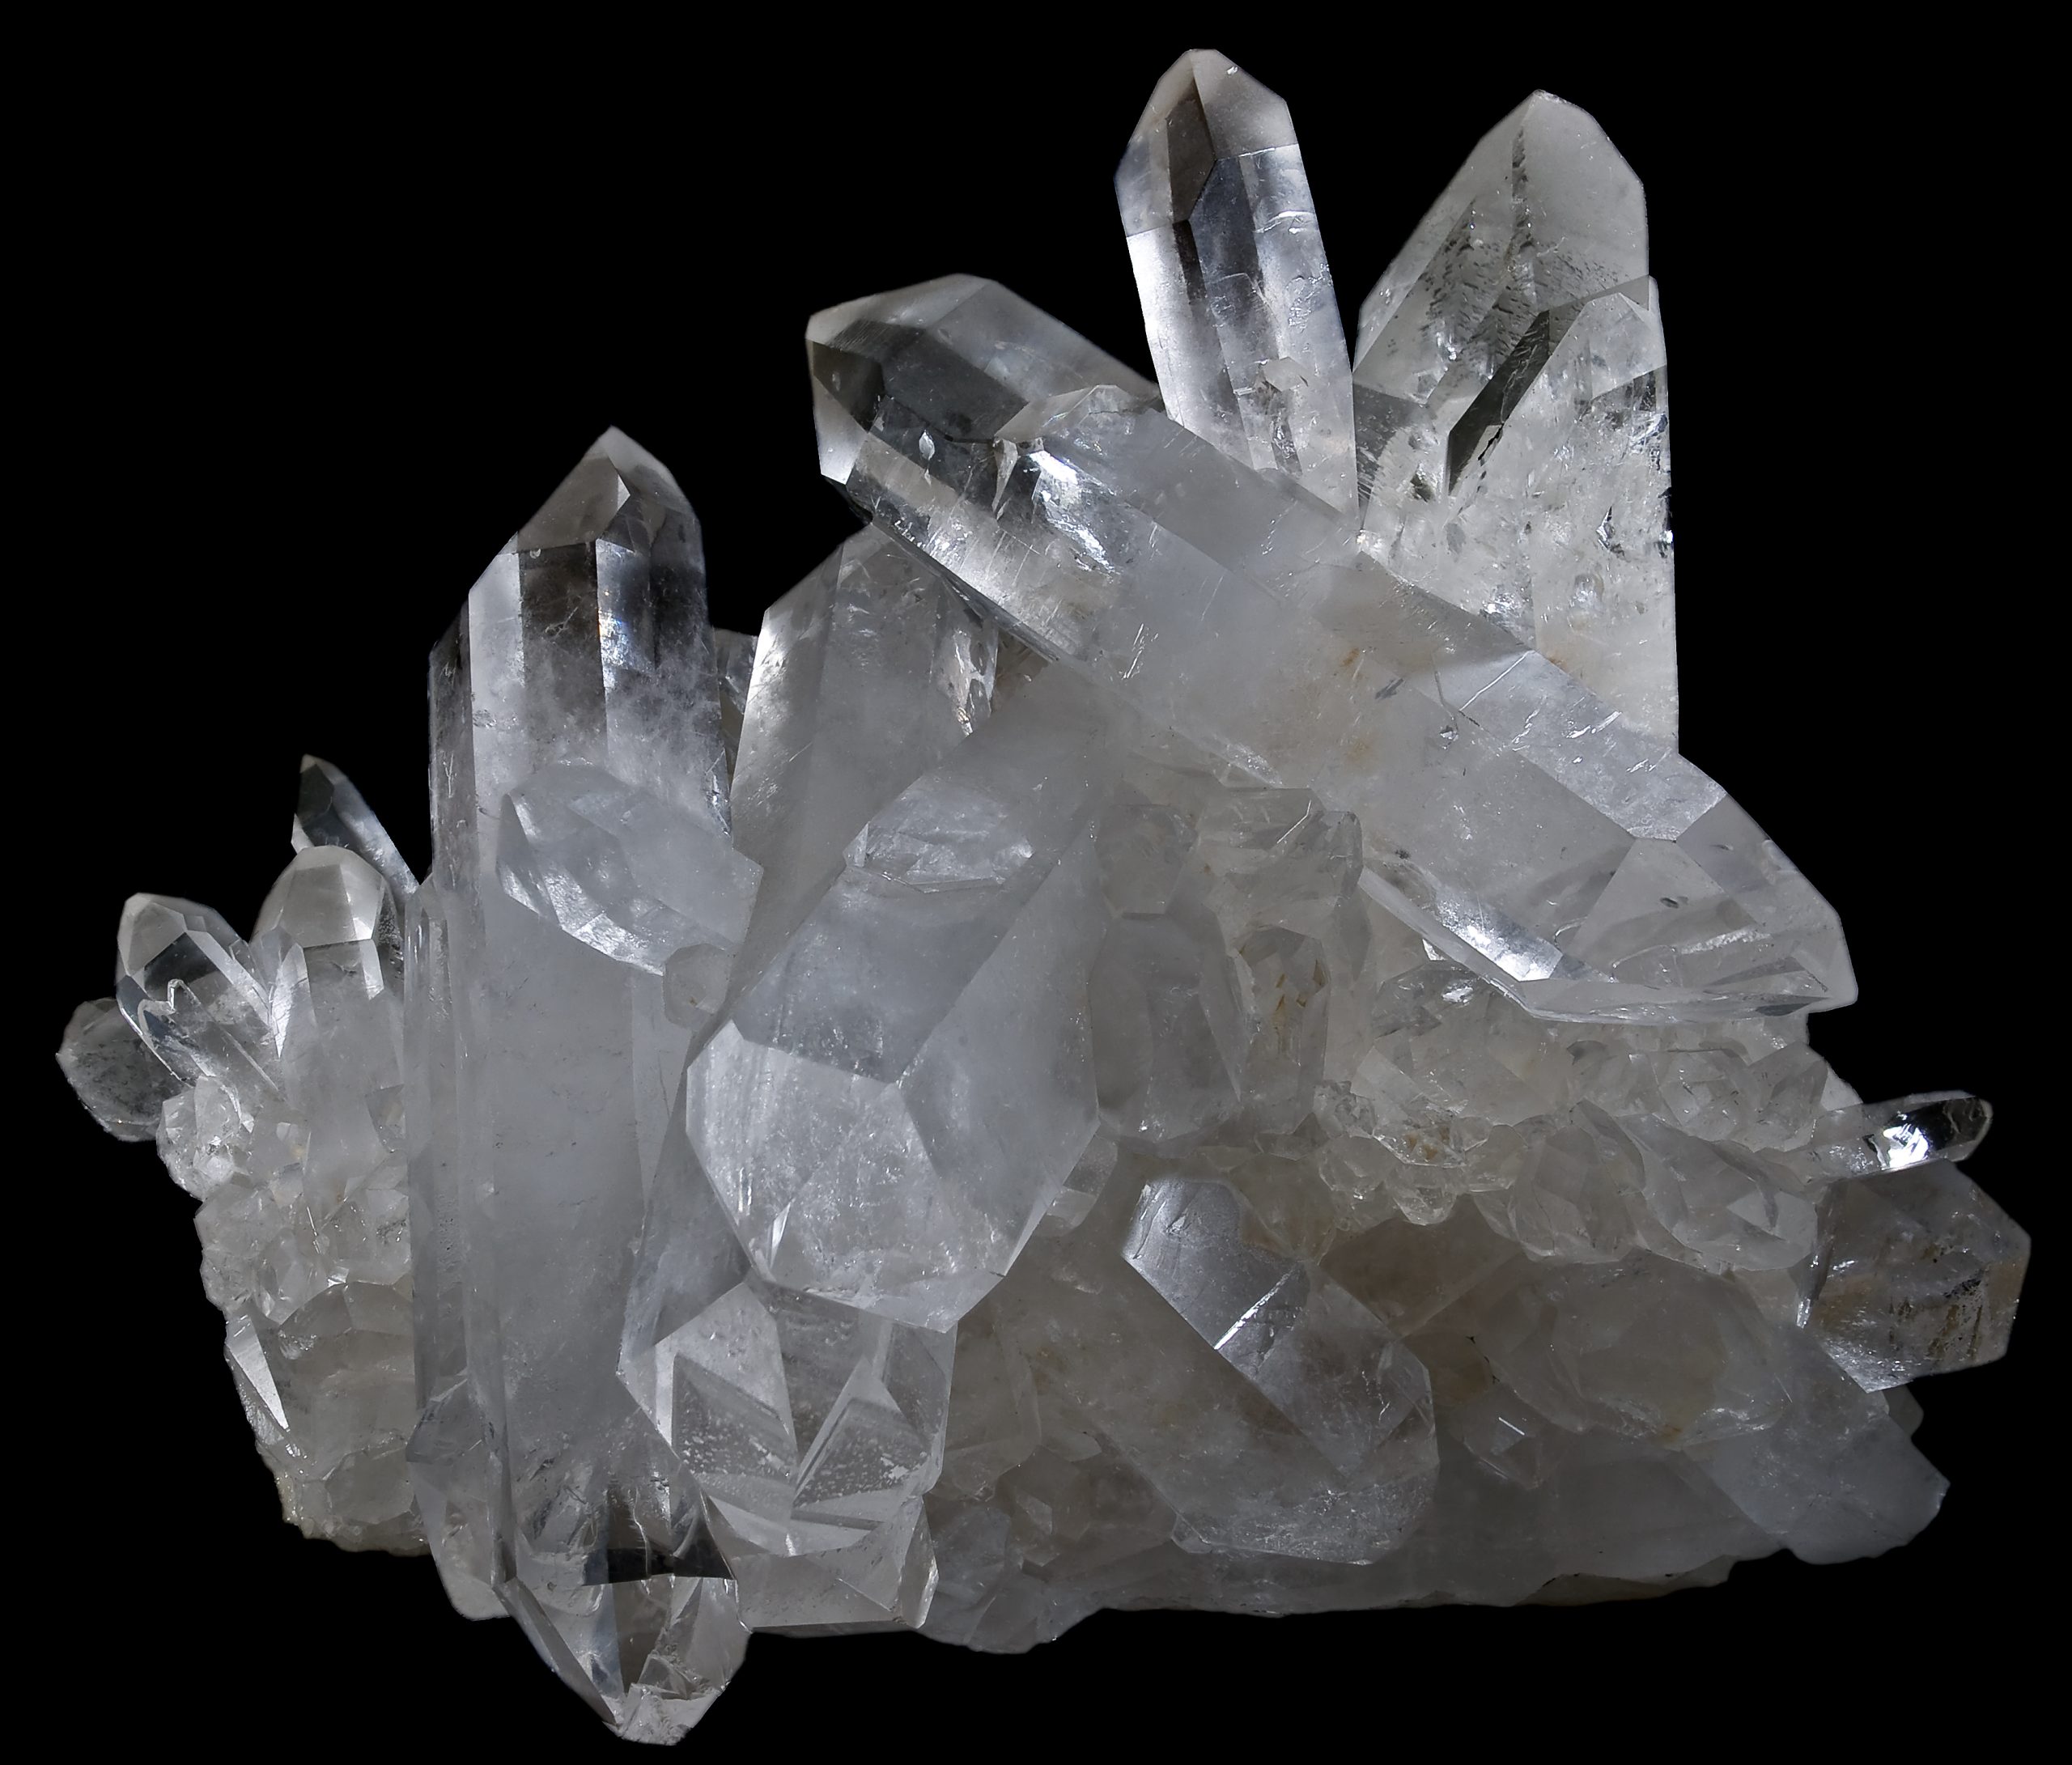 White, transluscent, long, then, glassy crystals poking in many directions